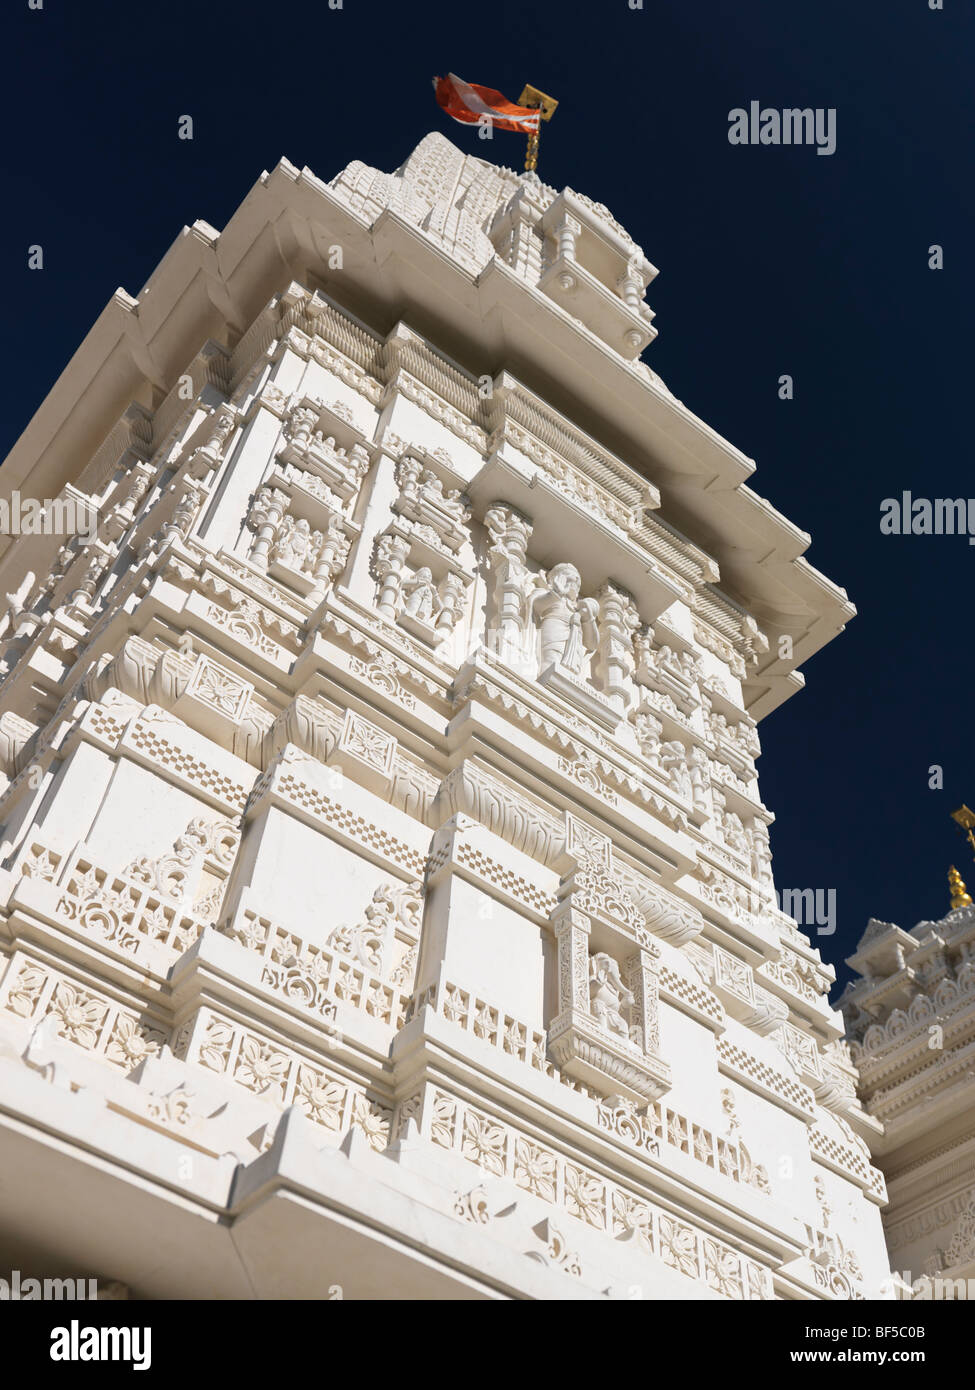 Tower of The Swaminarayan Mandir hand-carved white marble Hindu temple in Toronto, Ontario, Canada. Stock Photo